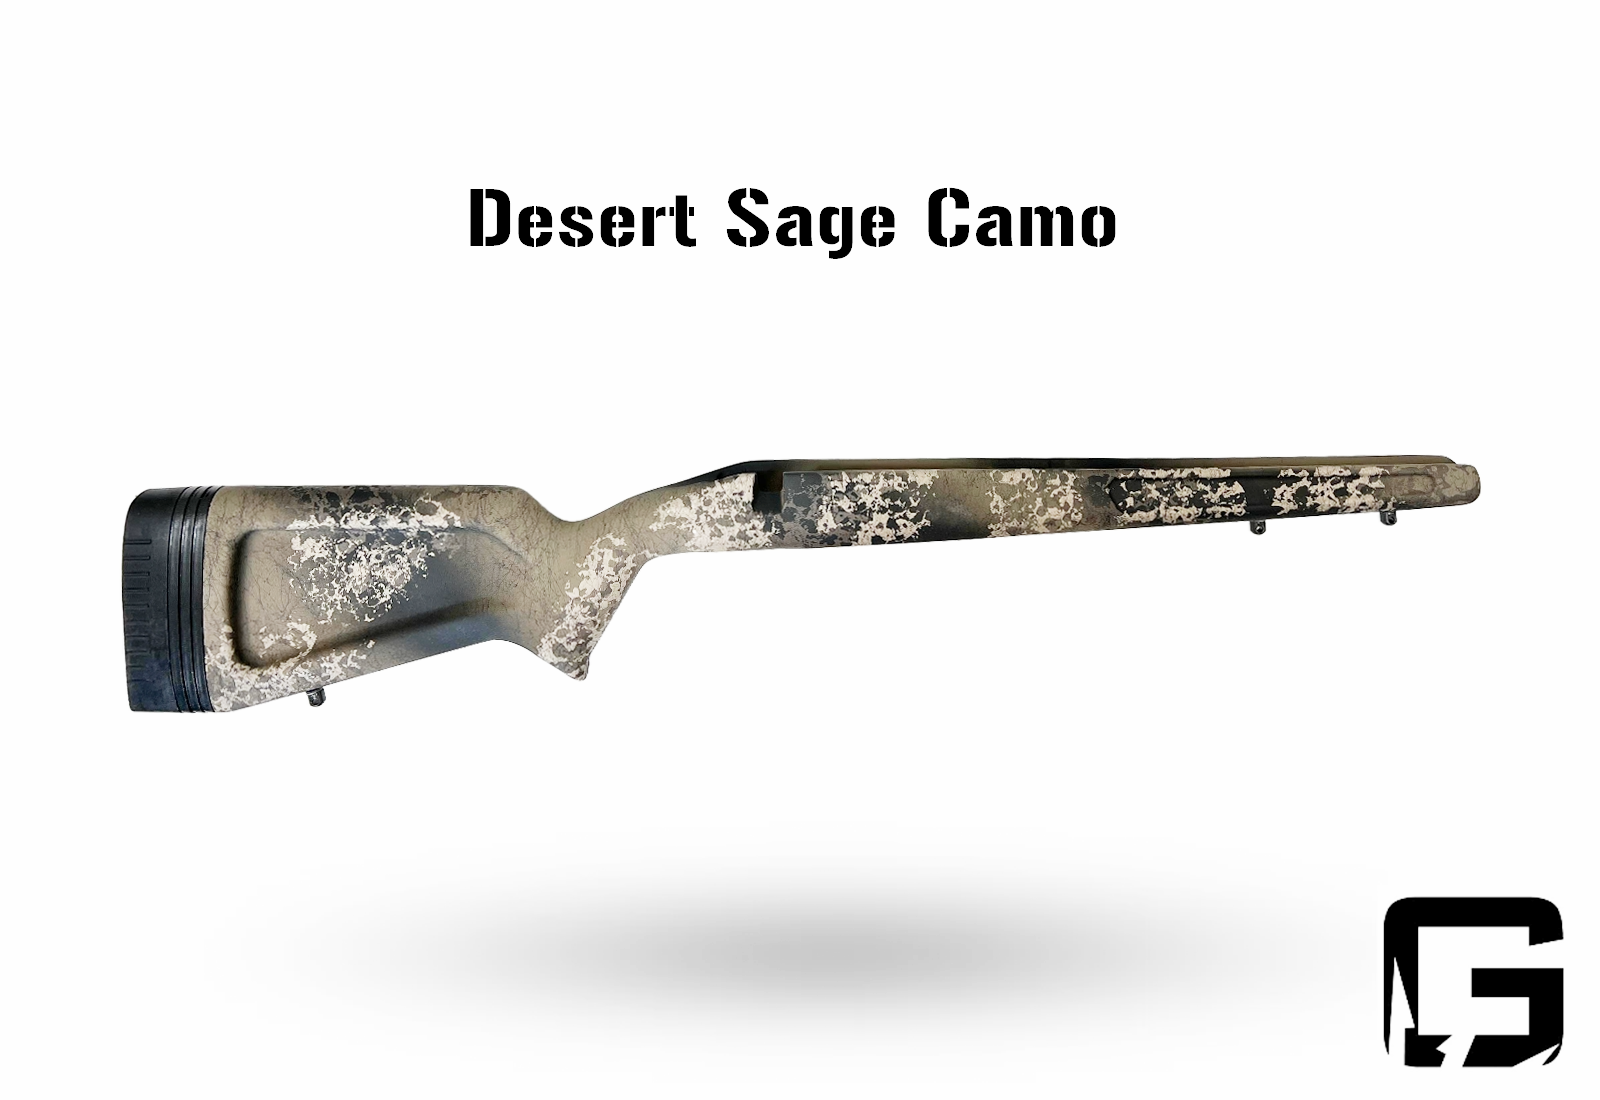 Eagle - Right Hand Rem 700 or 700 clone Long Action, M5.  Painted Desert Sage Camo.